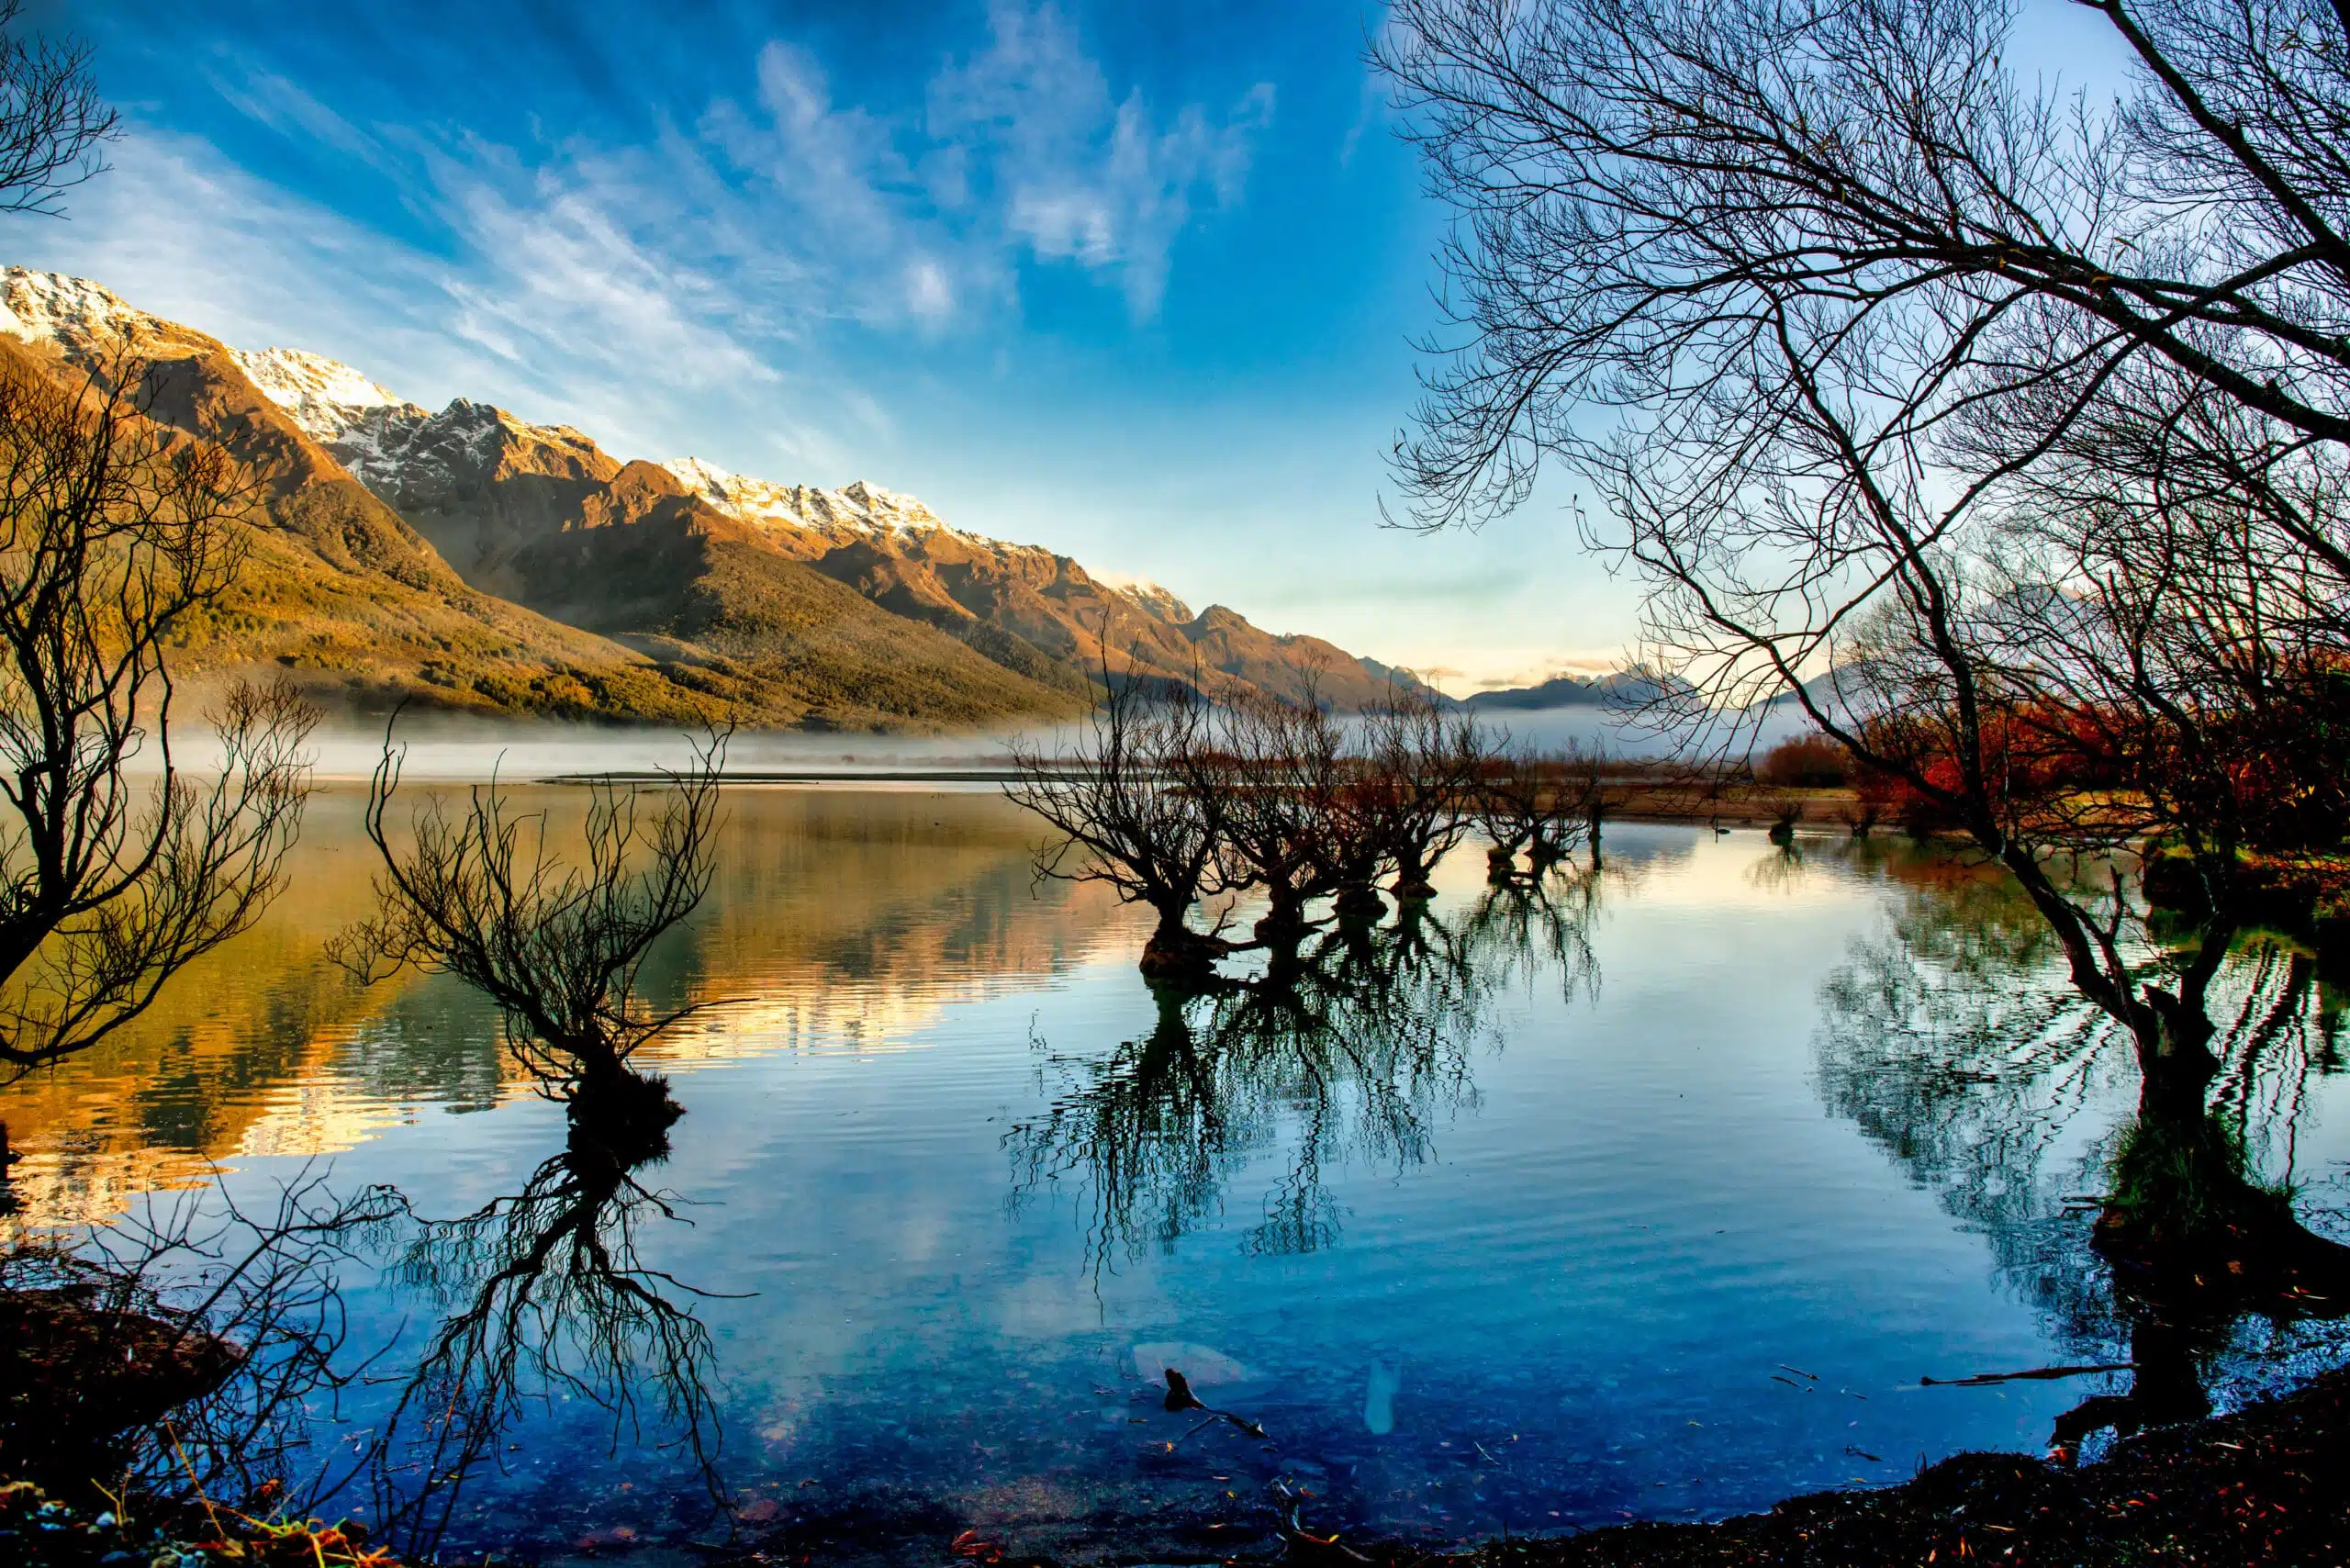 Glenorchy's famous row of willow trees growing out of Lake Wakatipu at sunrise